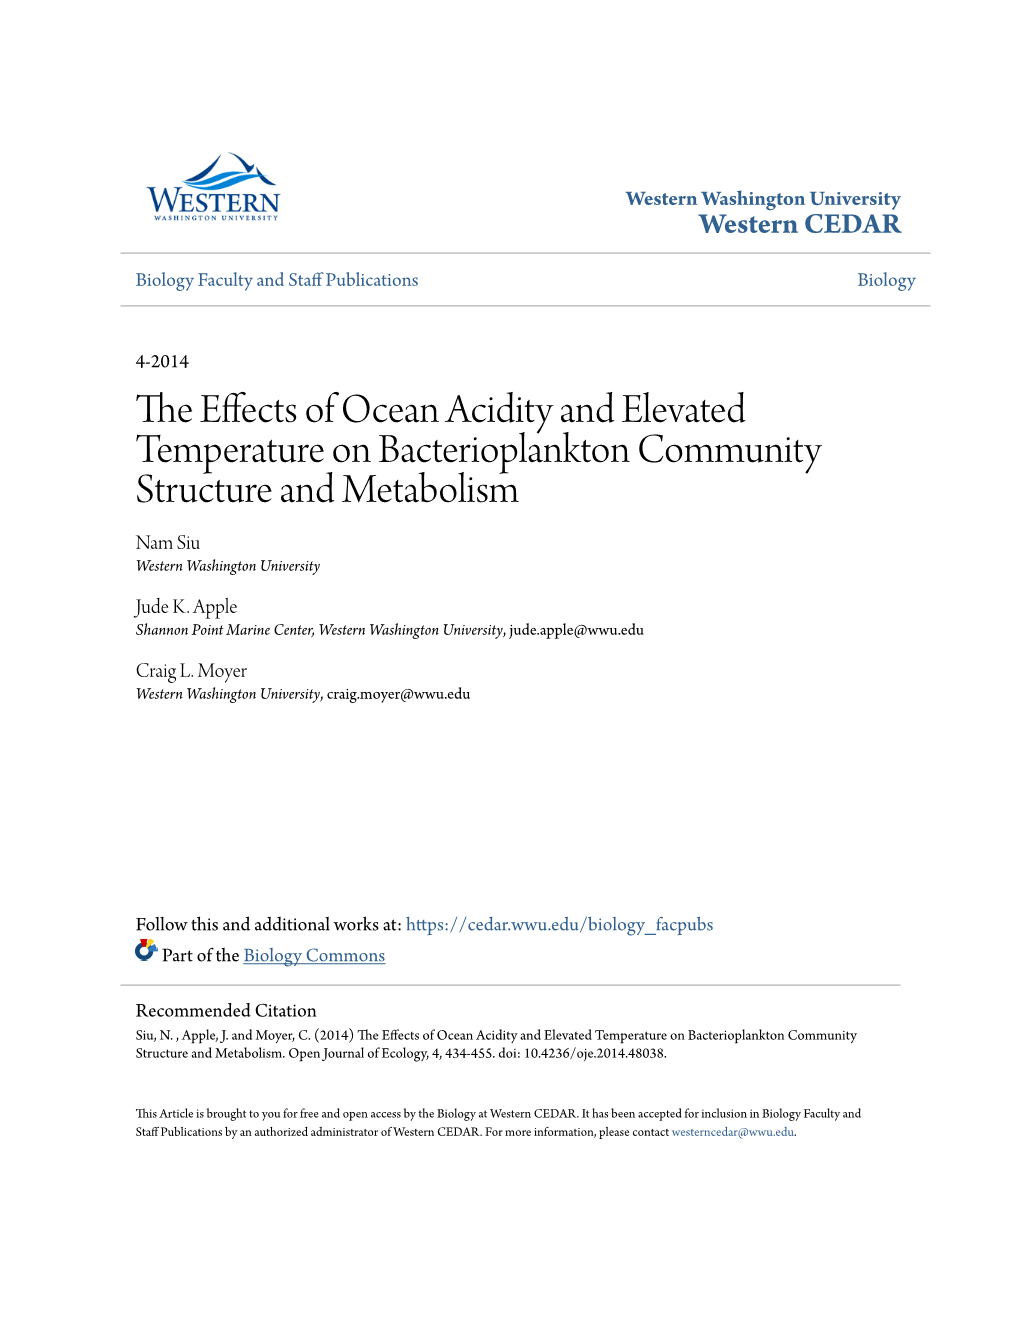 The Effects of Ocean Acidity and Elevated Temperature on Bacterioplankton Community Structure and Metabolism